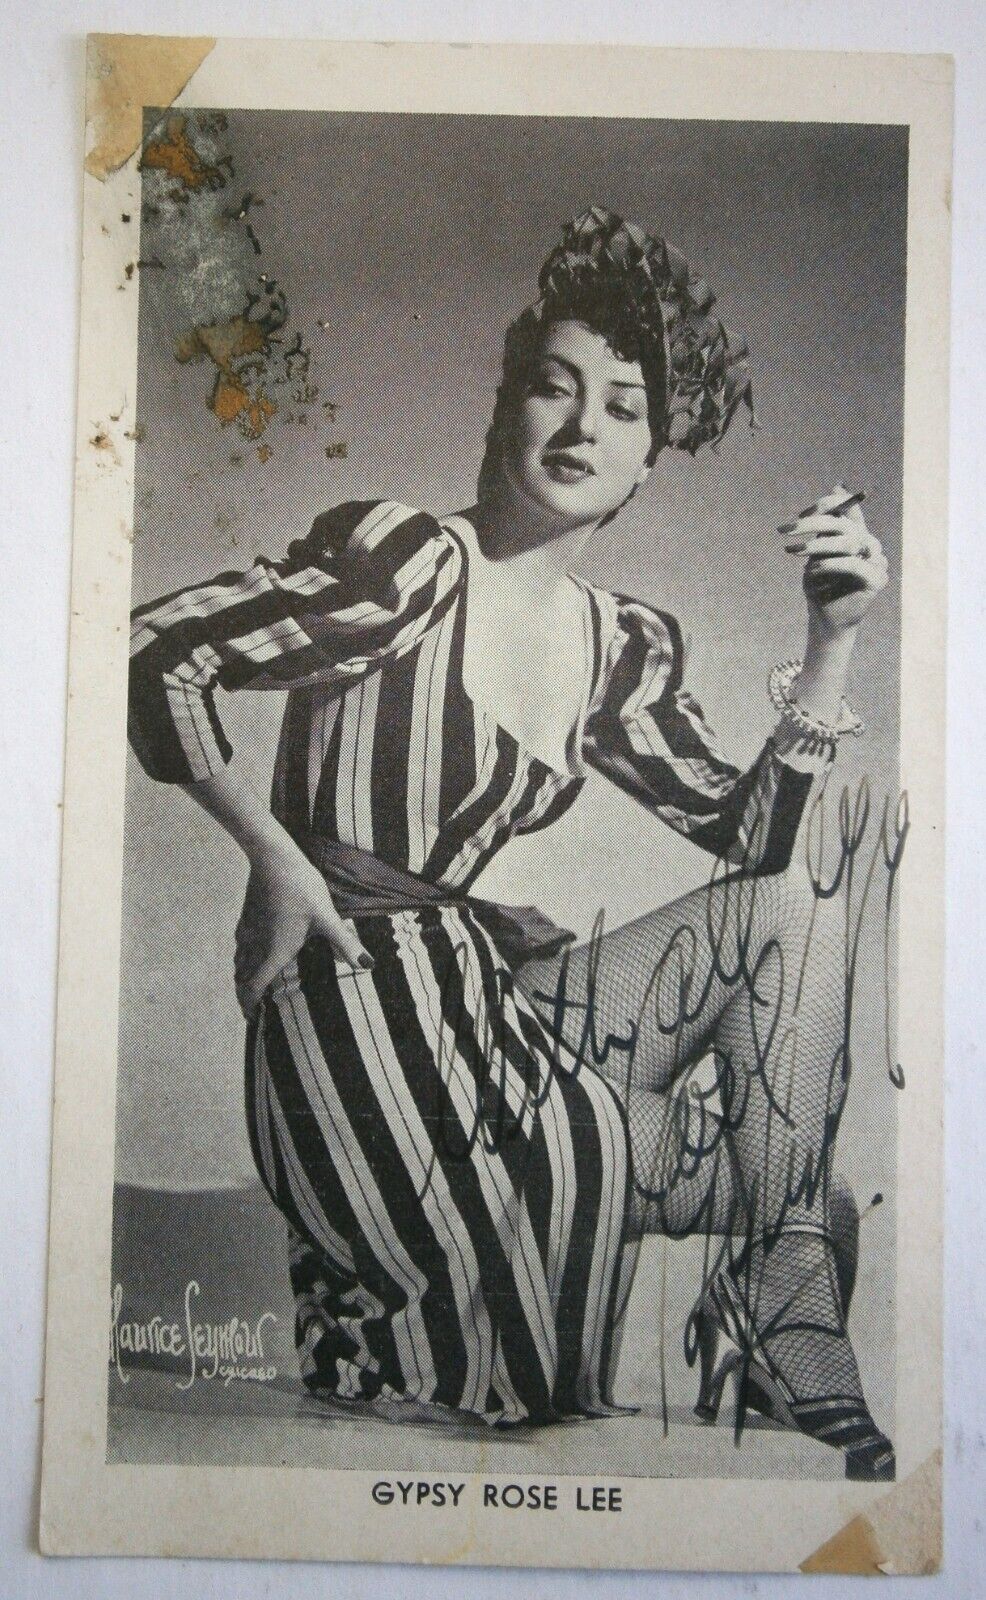 Autographed Promotional Photo of a Young GYPSY ROSE LEE c.1930's